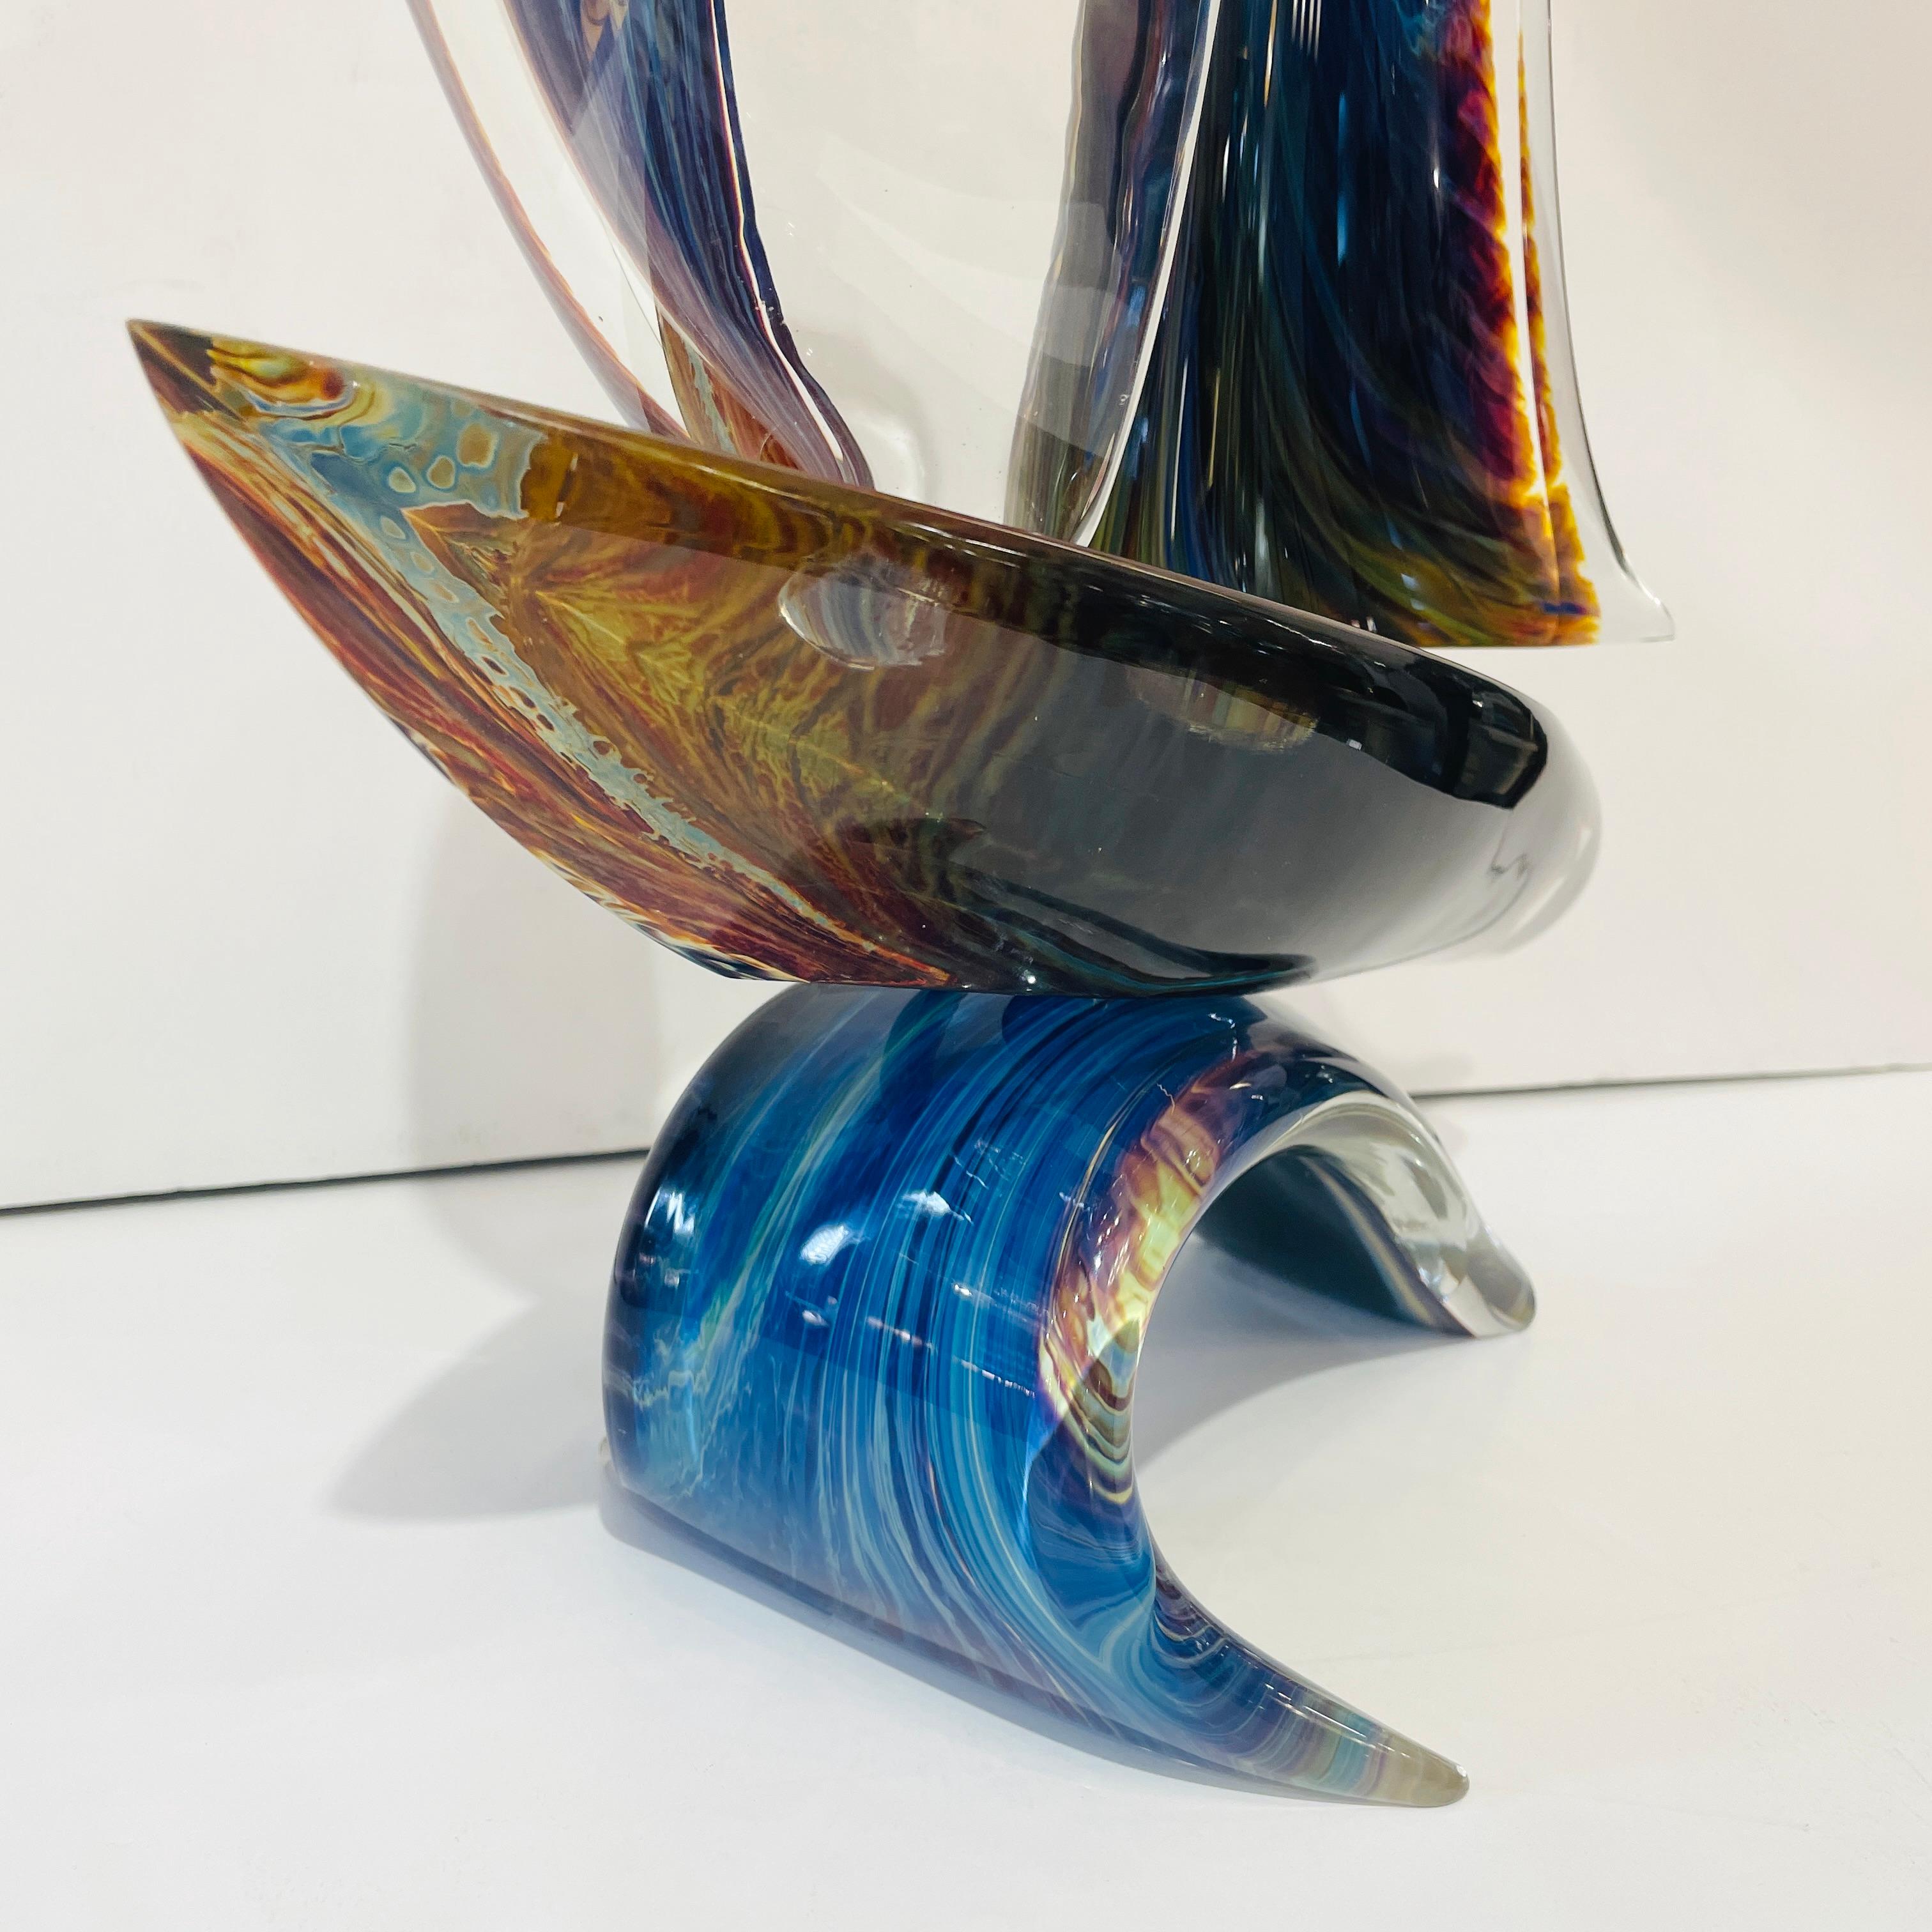 Contemporary 2015 Italian Yellow Blue Brown Crystal Murano Glass Boat Modernist Art Sculpture For Sale